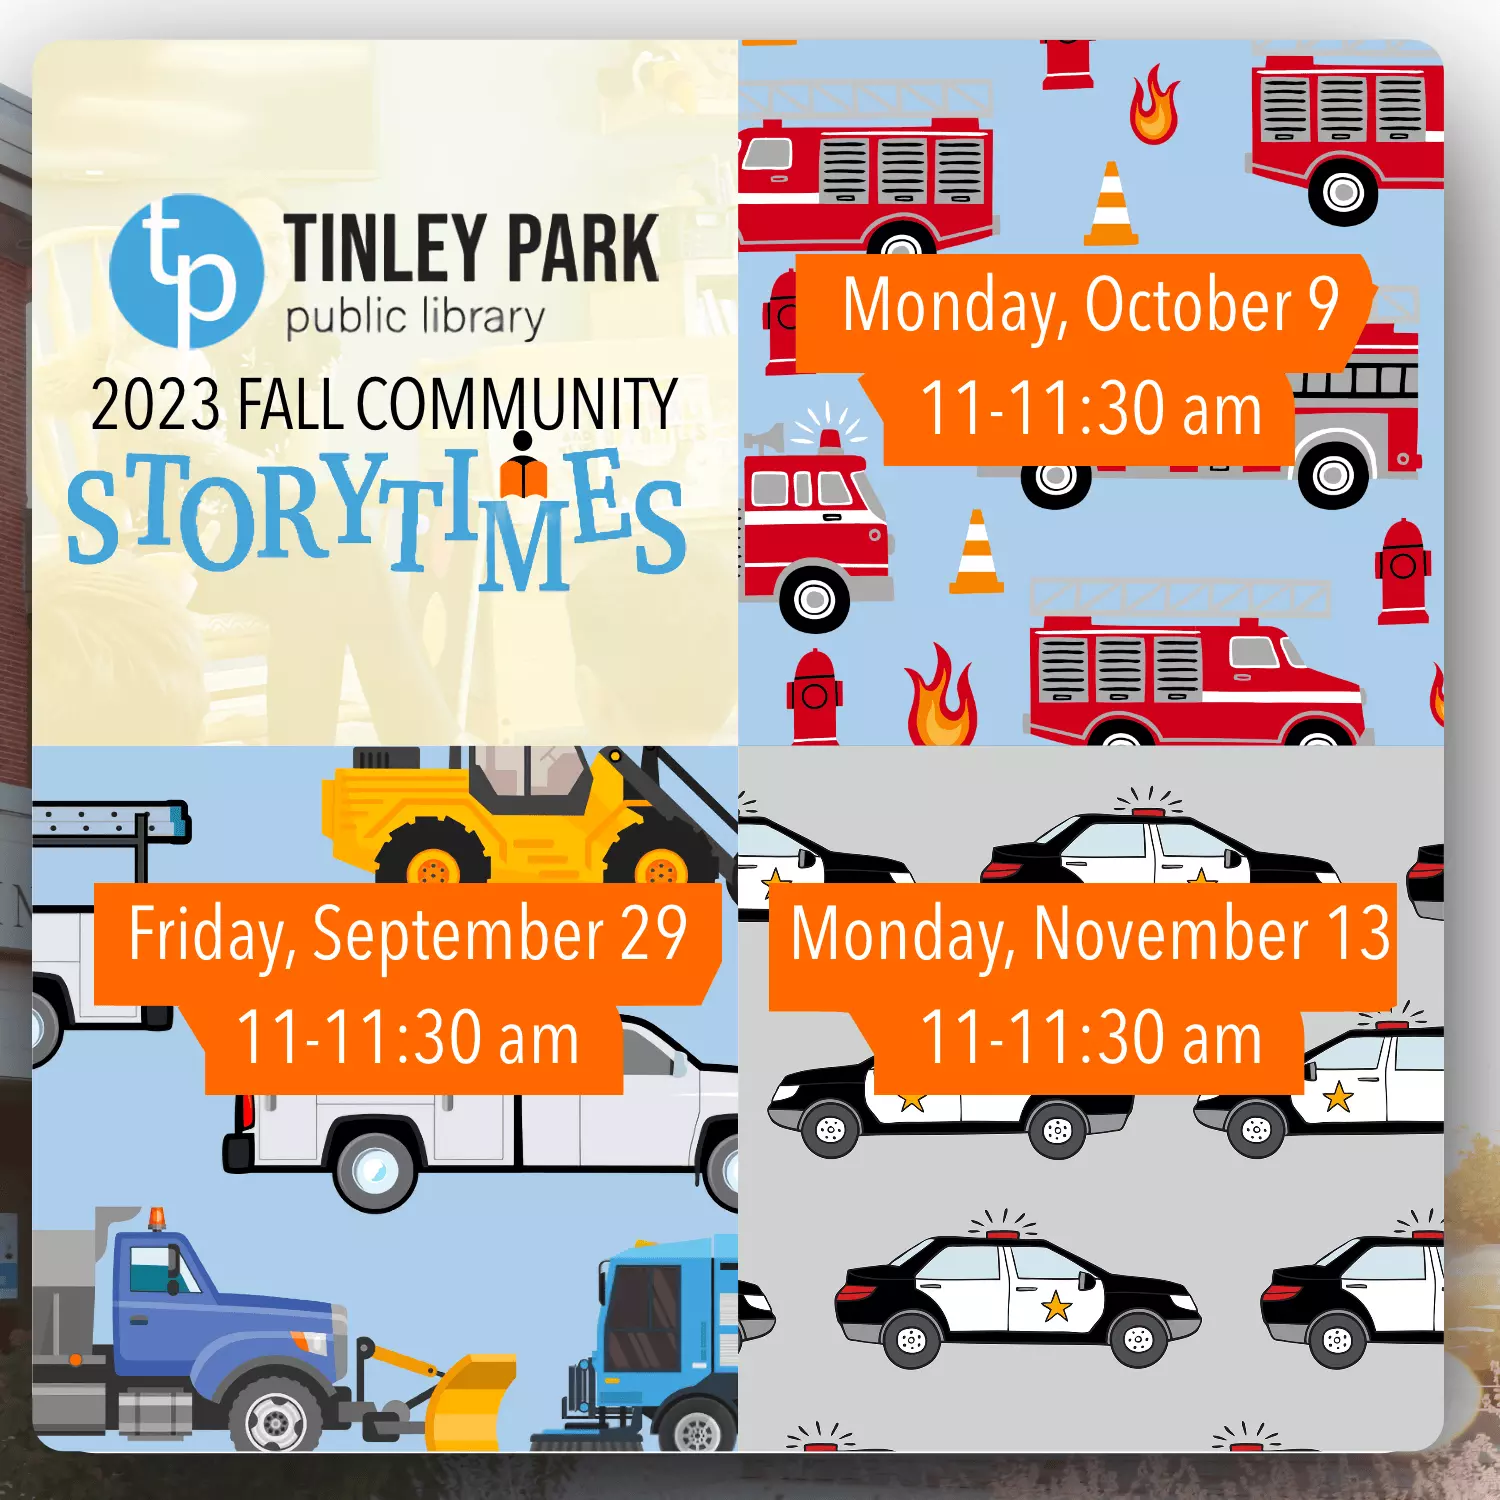 Community Storytimes Coming To Tinley Park Library In Fall 2023